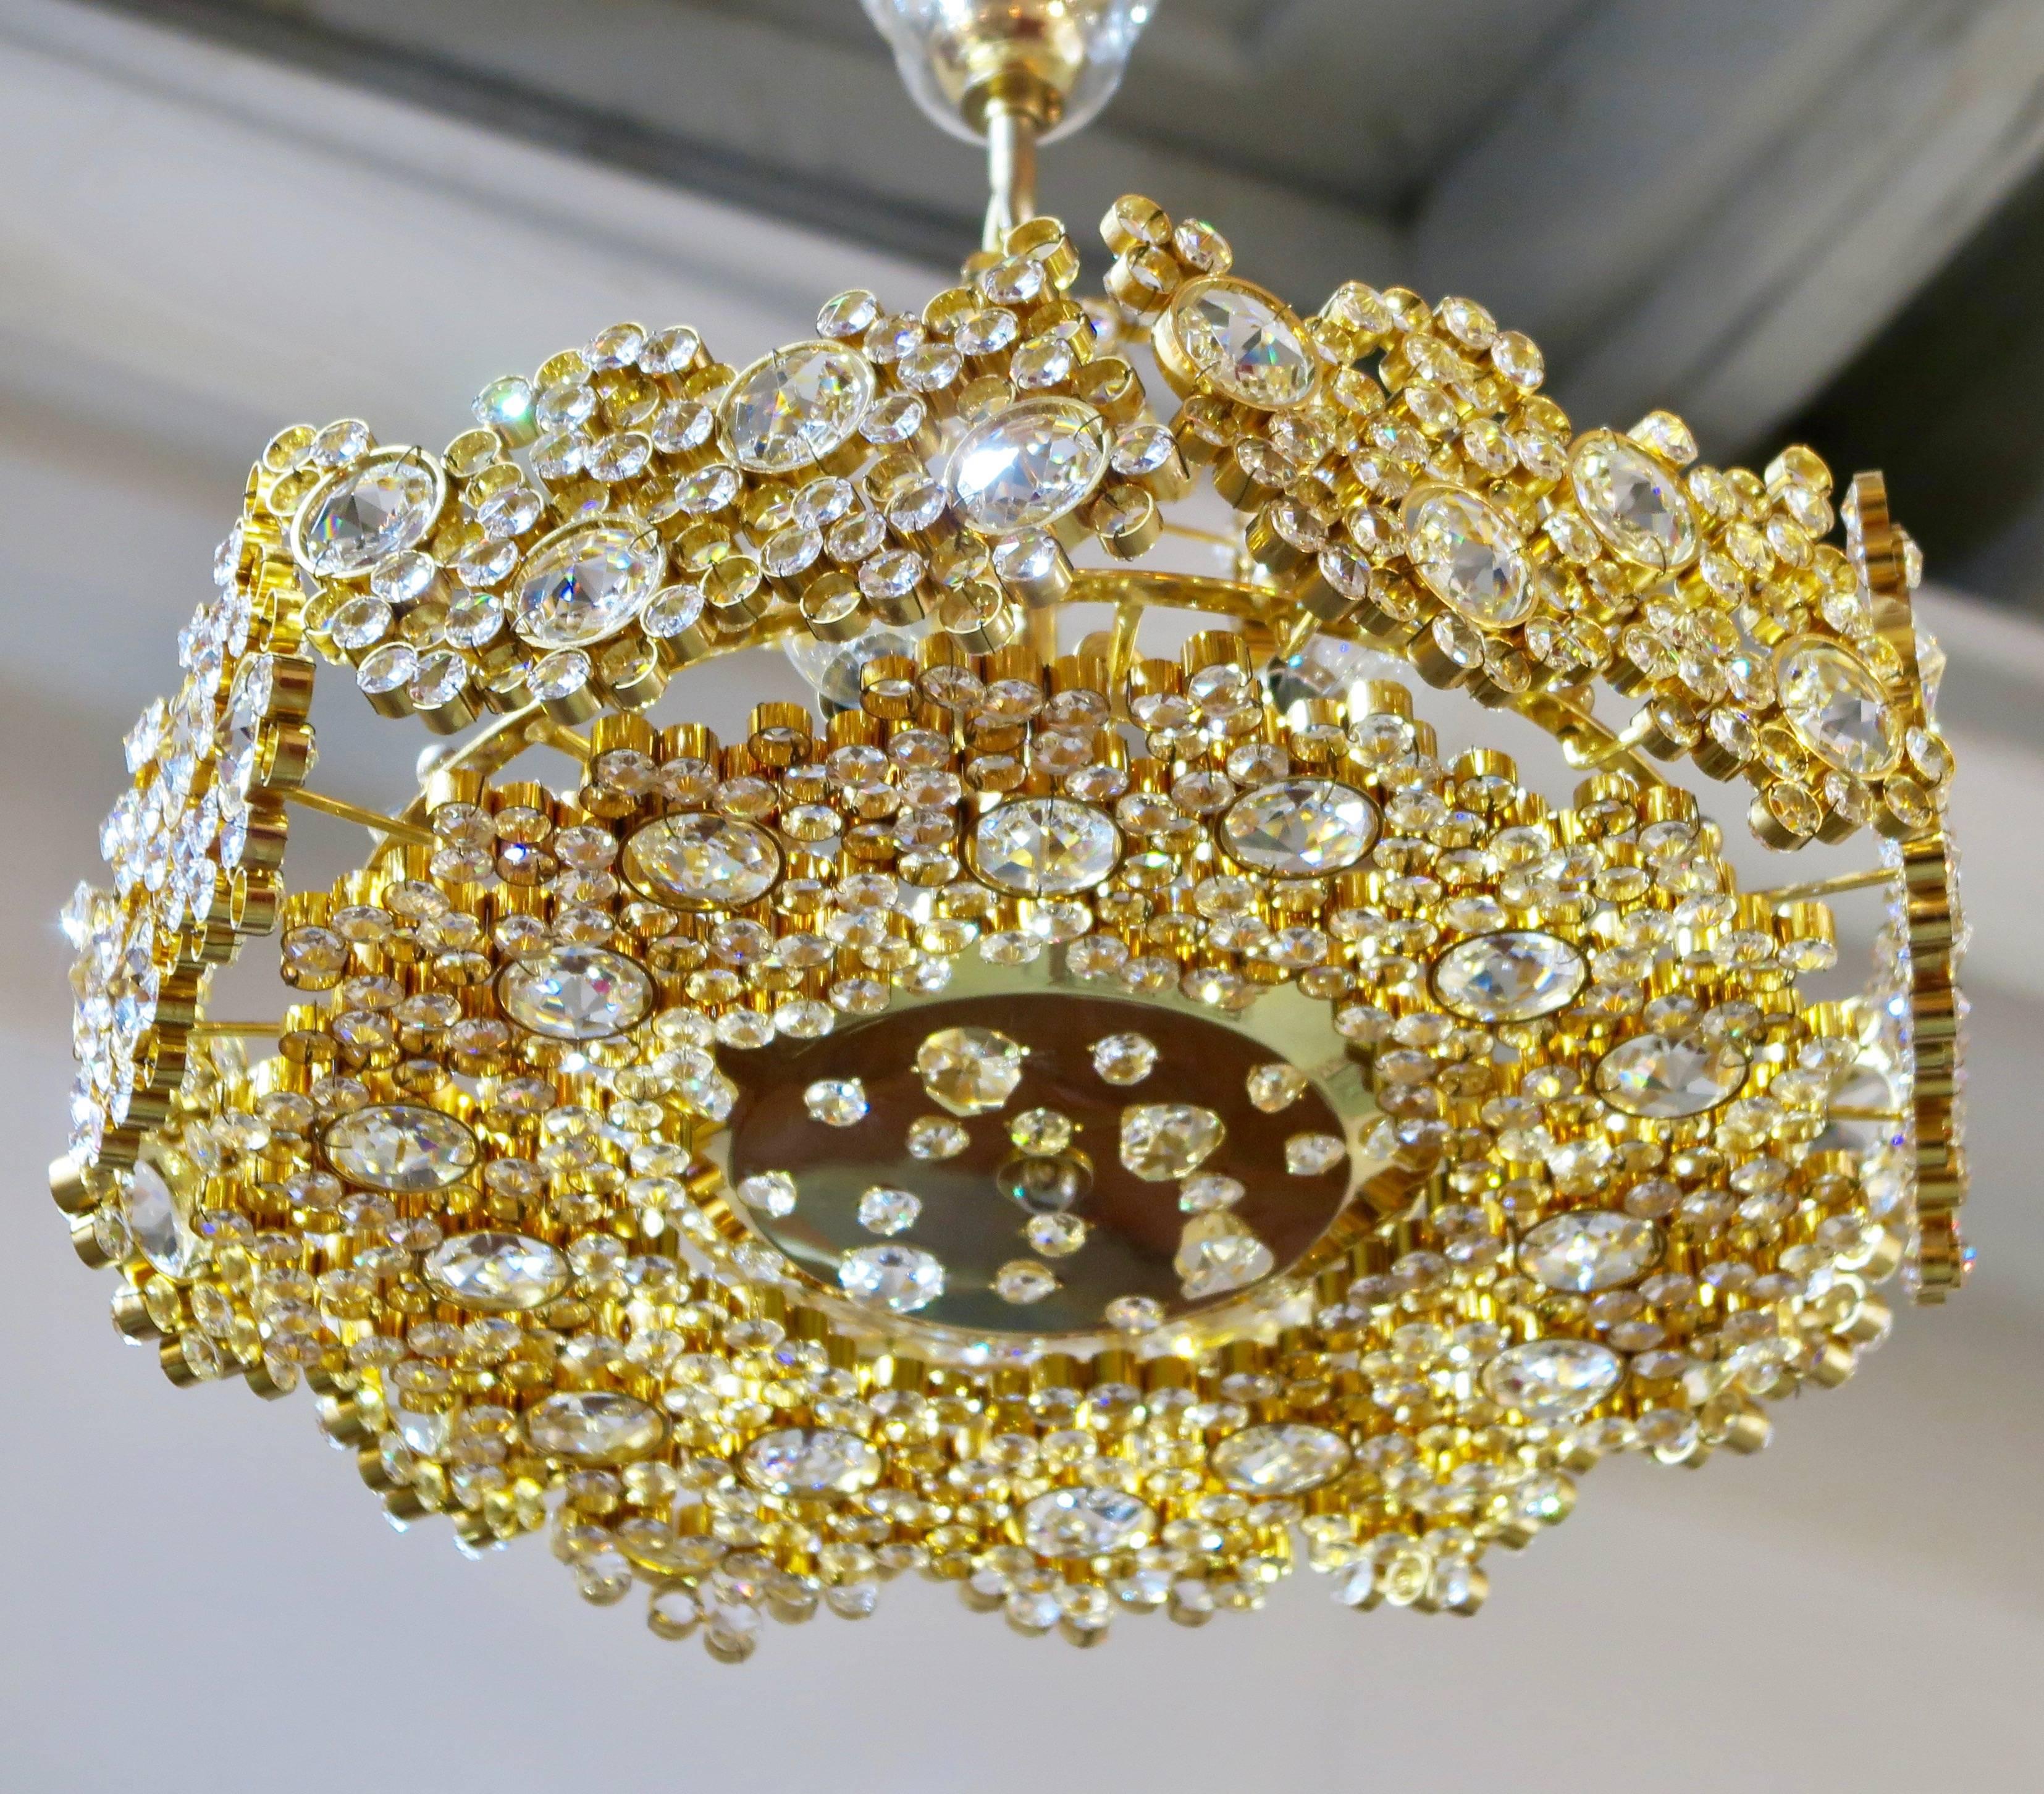 German Mid-Century Modern Jewel like Chandelier with Hundreds of Crystals For Sale